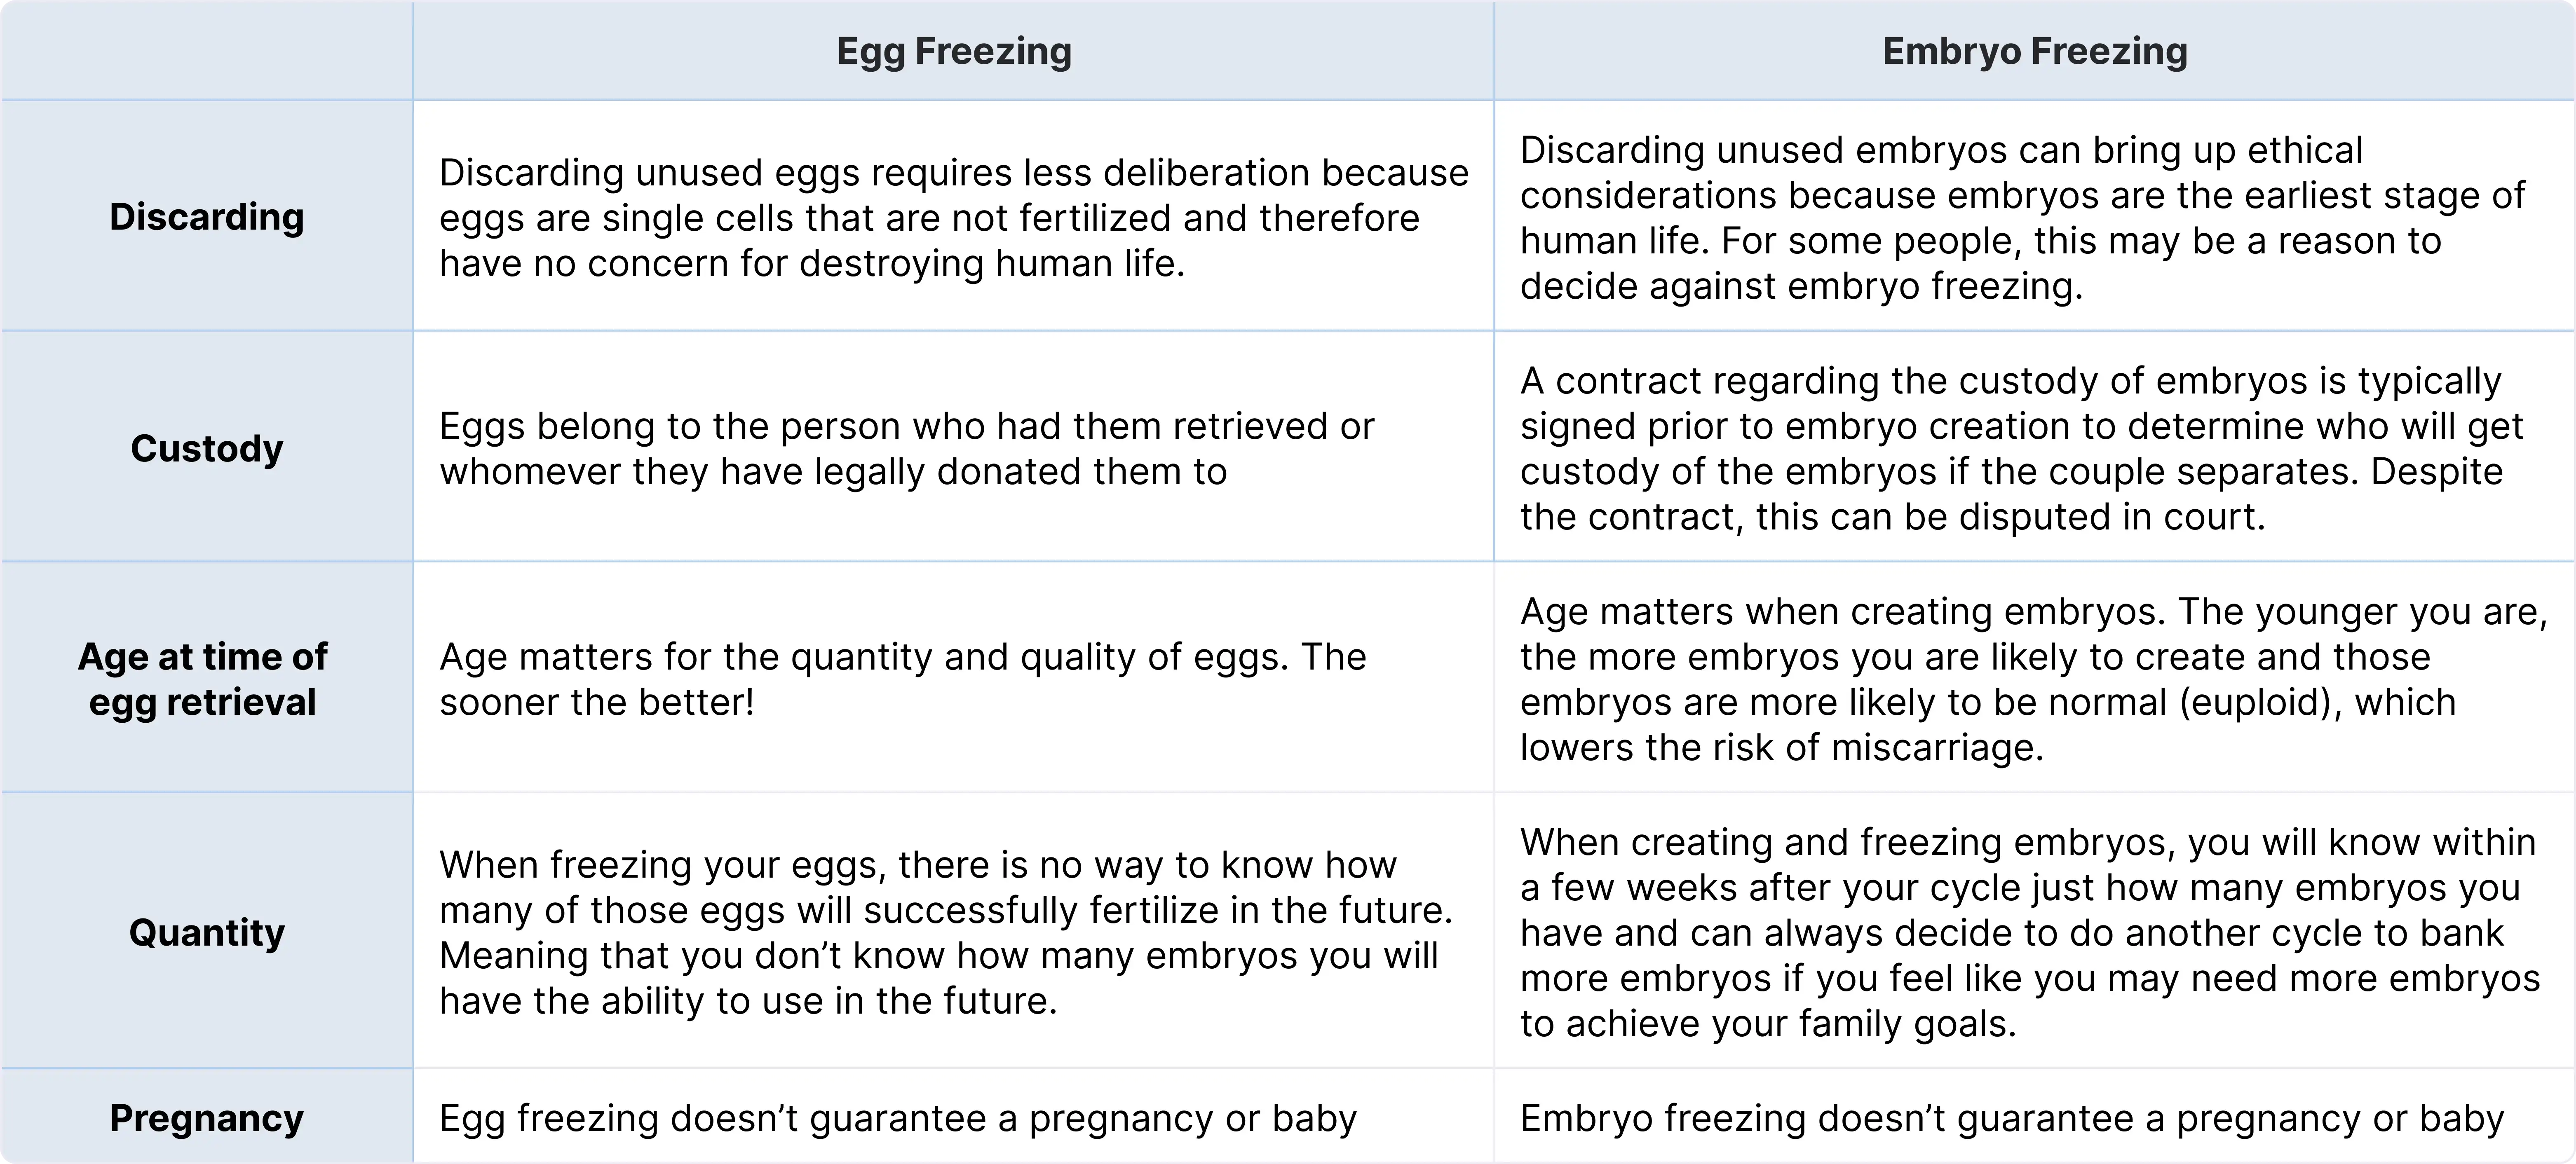 Other considerations for egg/embryo freezing